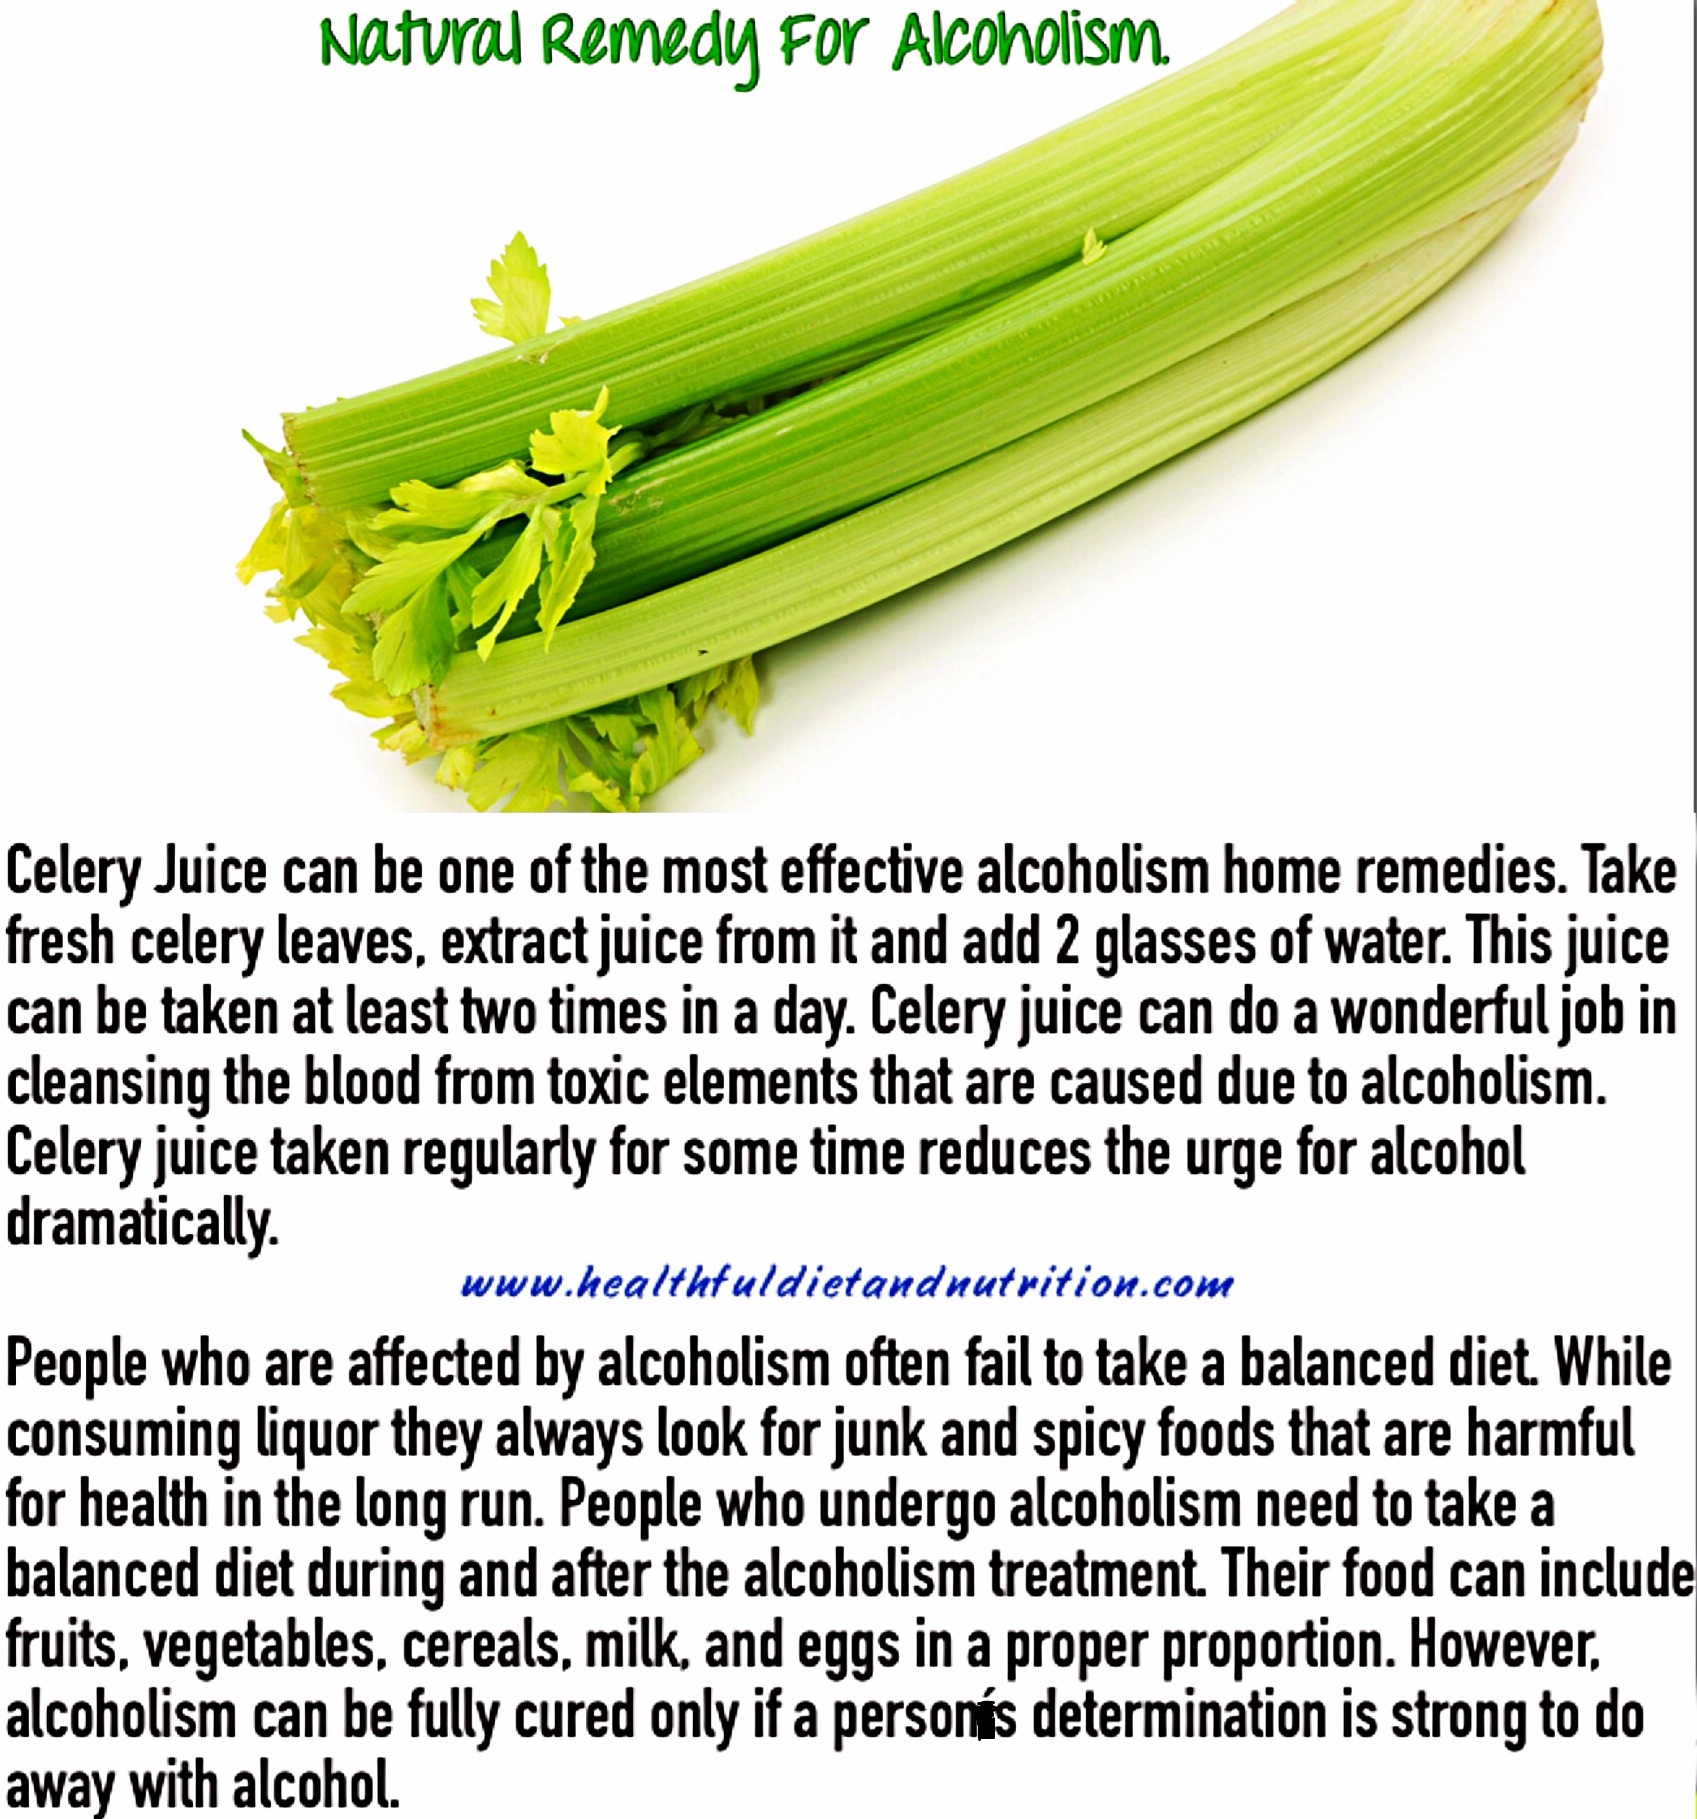 Natural Remedy For Alcoholism